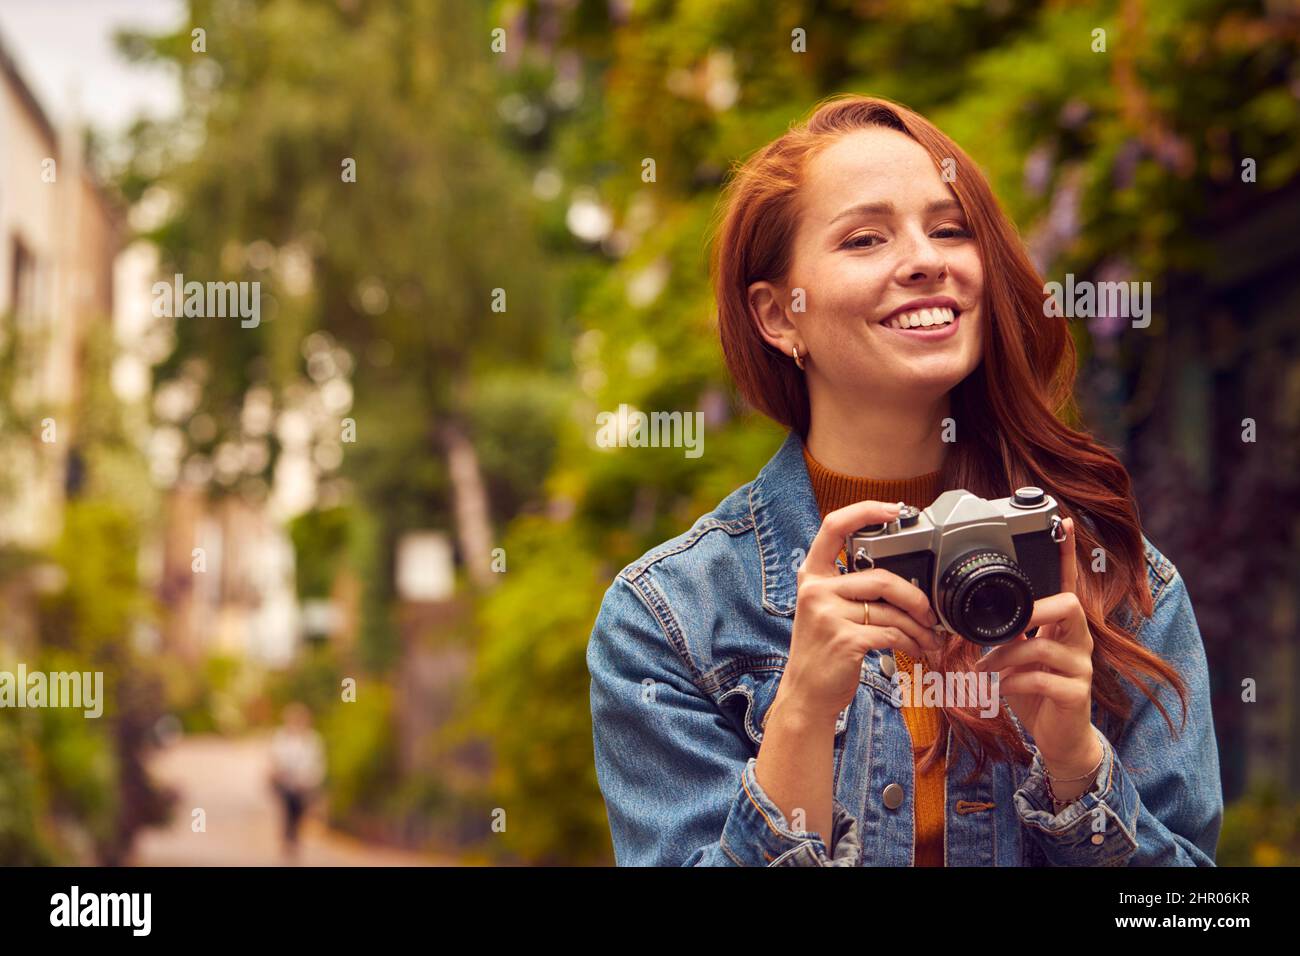 Young Woman In City Taking Photo On Digital Camera To Post To Social Media Stock Photo